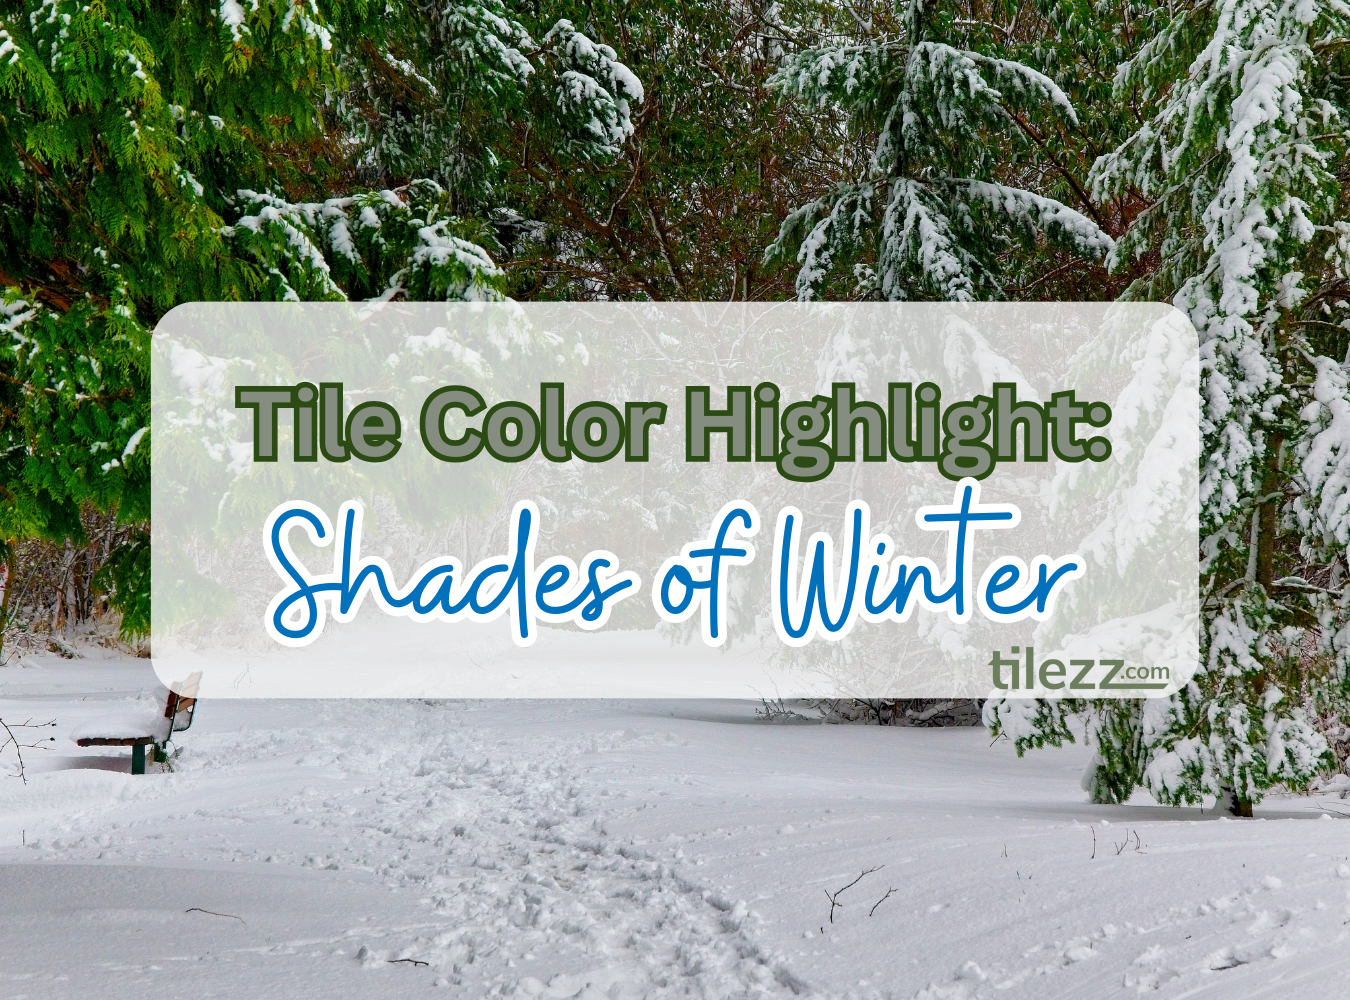 Tile Color Highlight: Shades of Winter